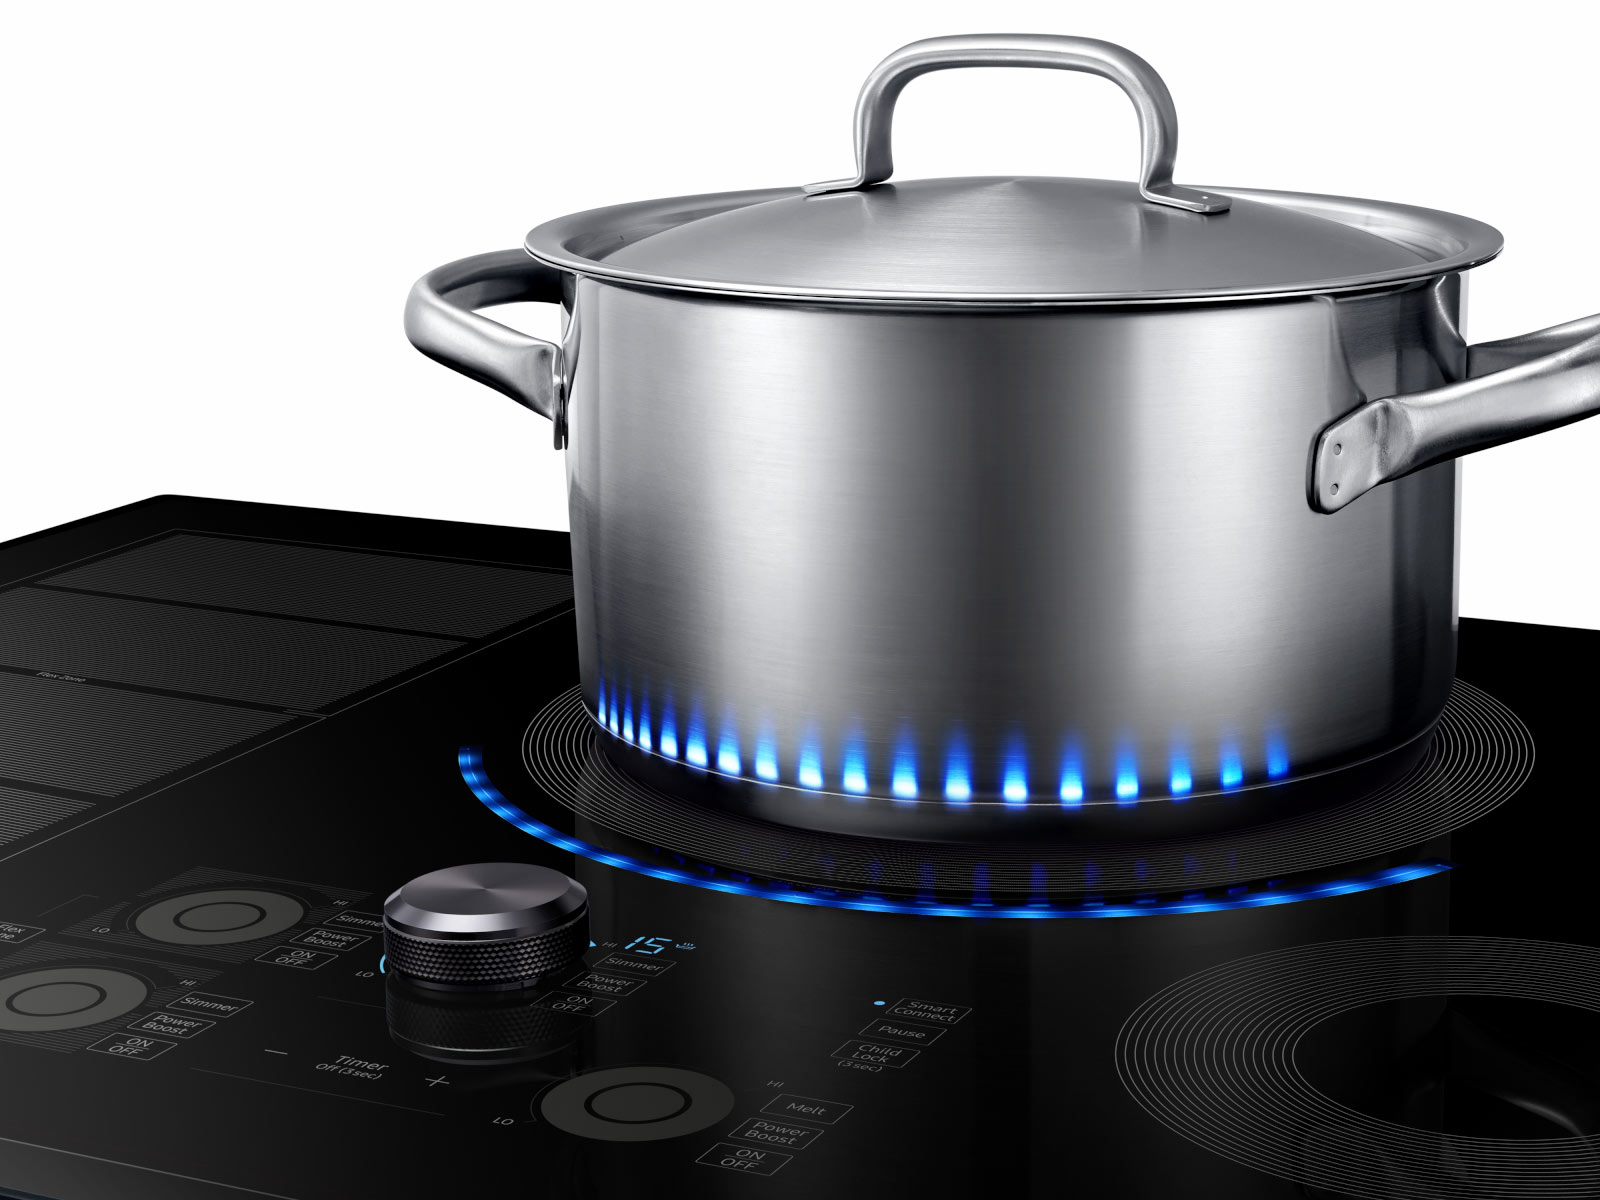 Samsung 30 Induction Cooktop with WiFi and Virtual Flame Black